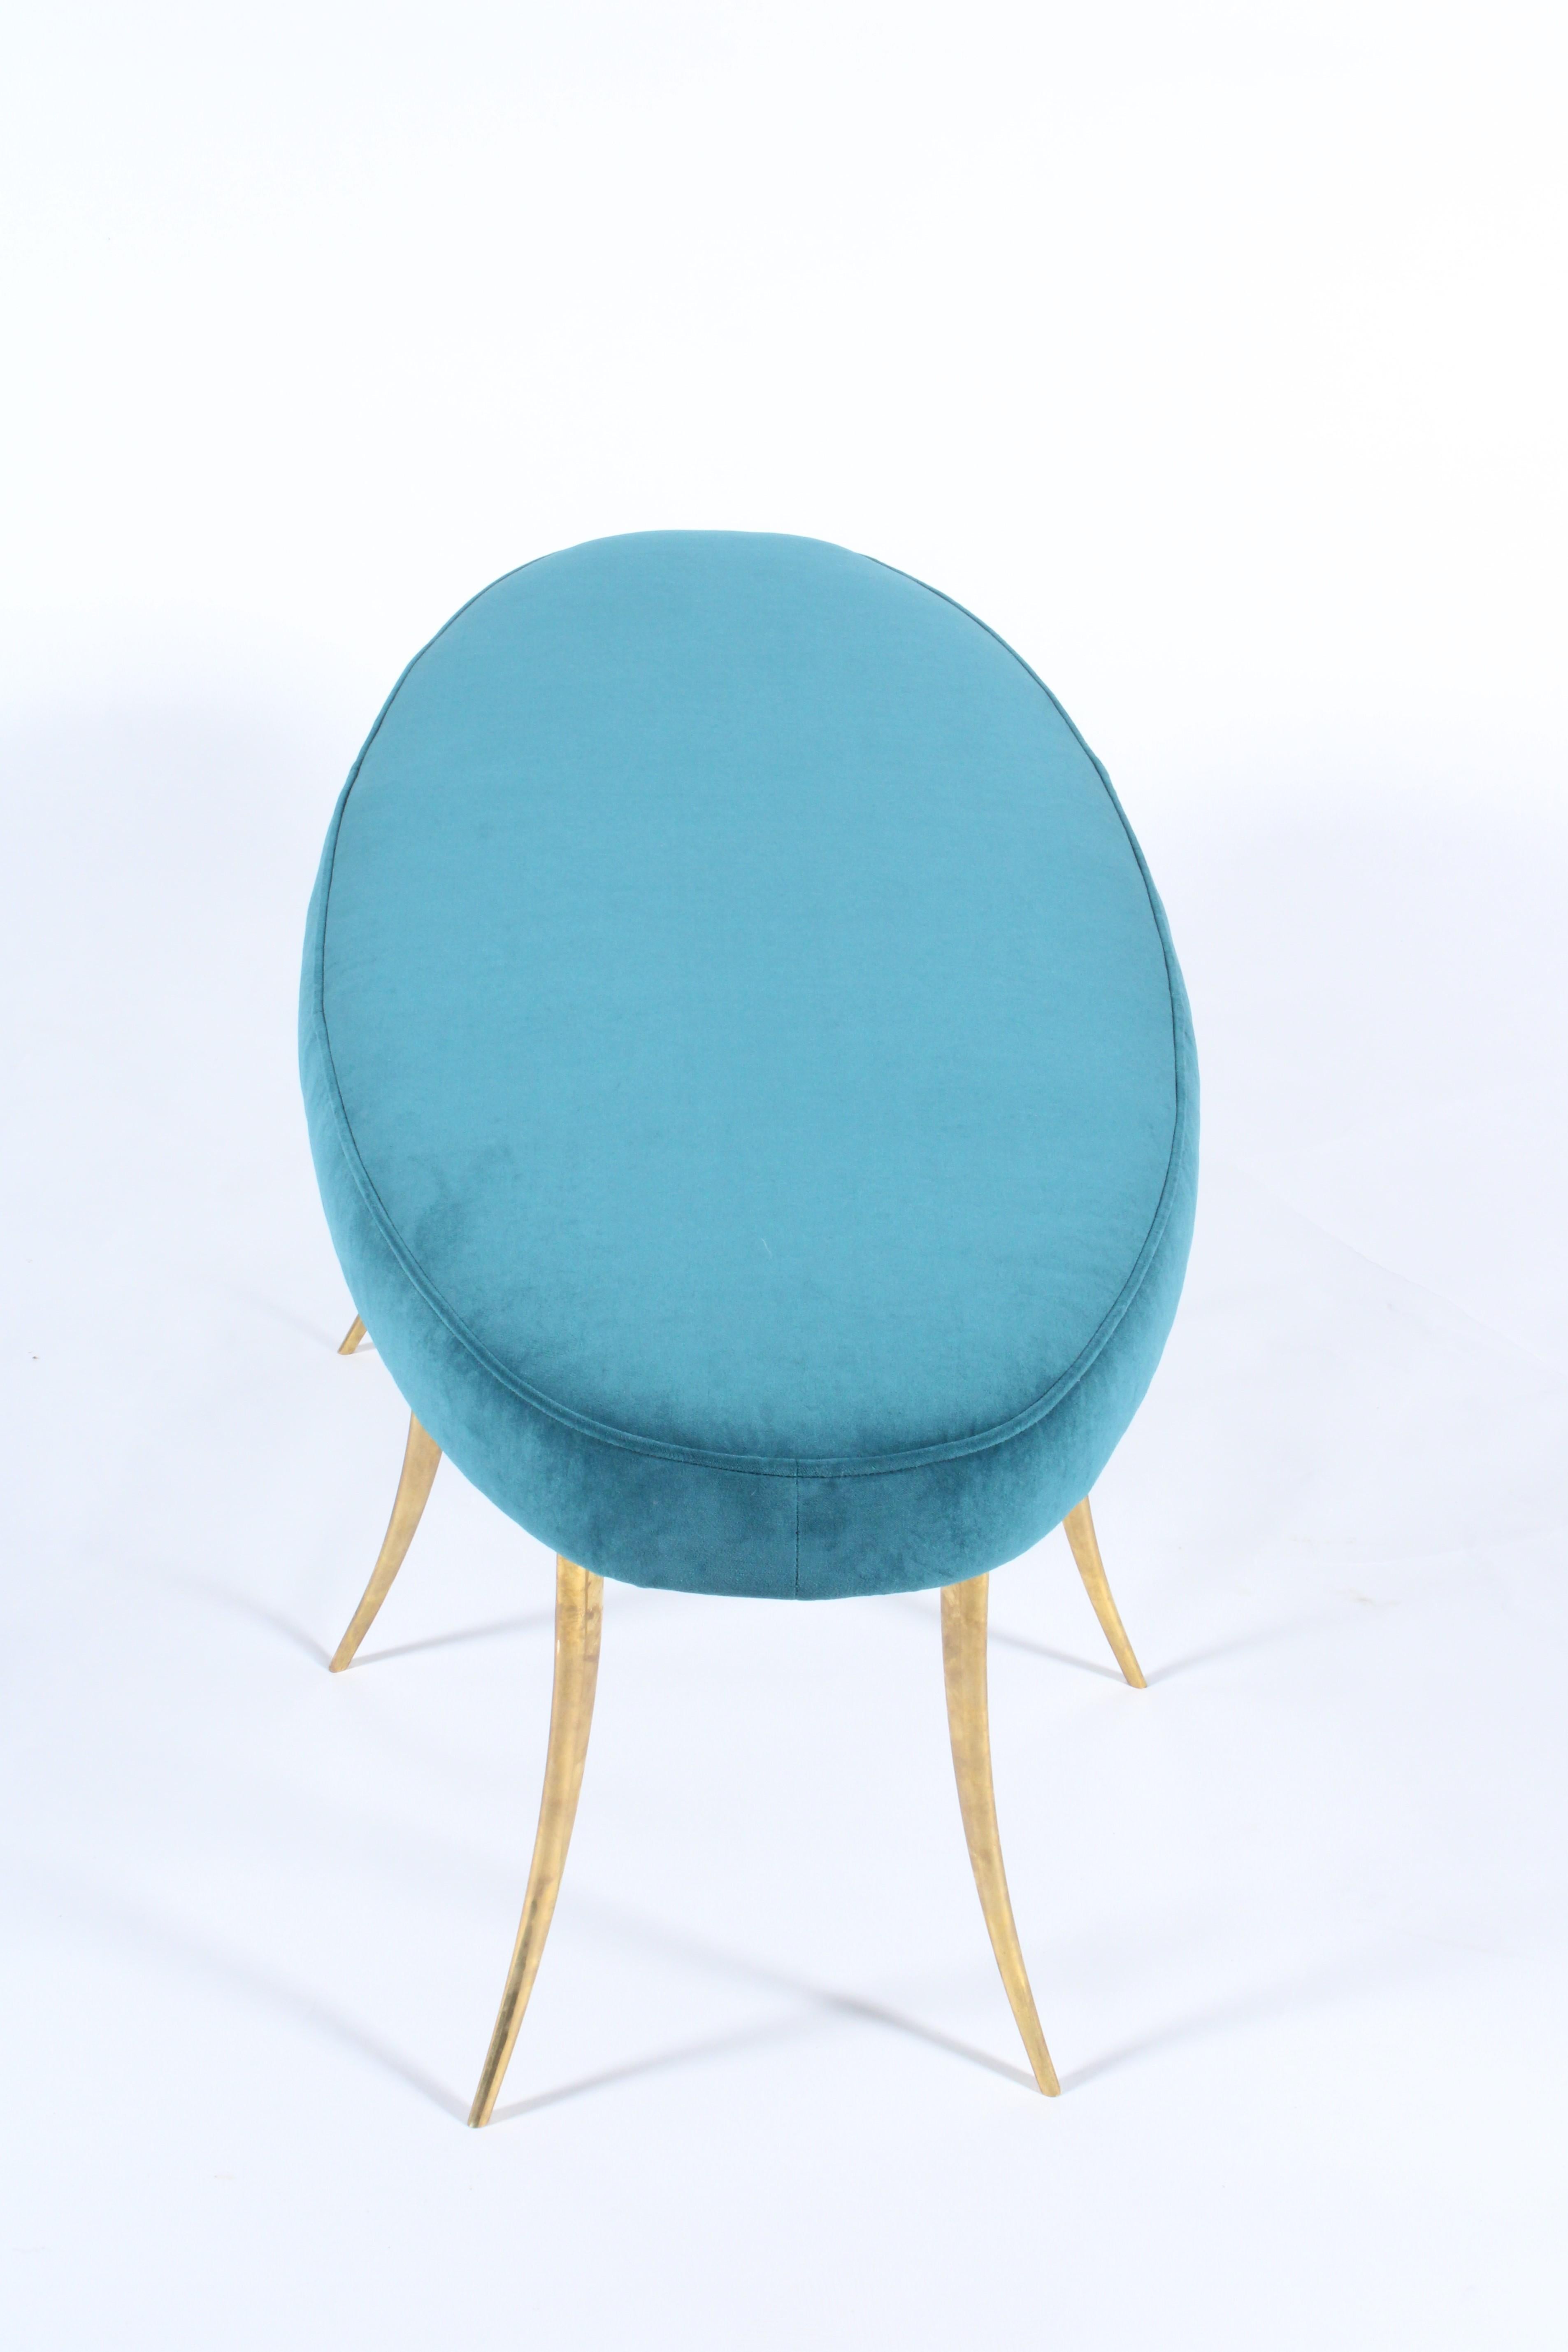  Bespoke Vintage Italian Bench with Teal Upholstered Cushion For Sale 3